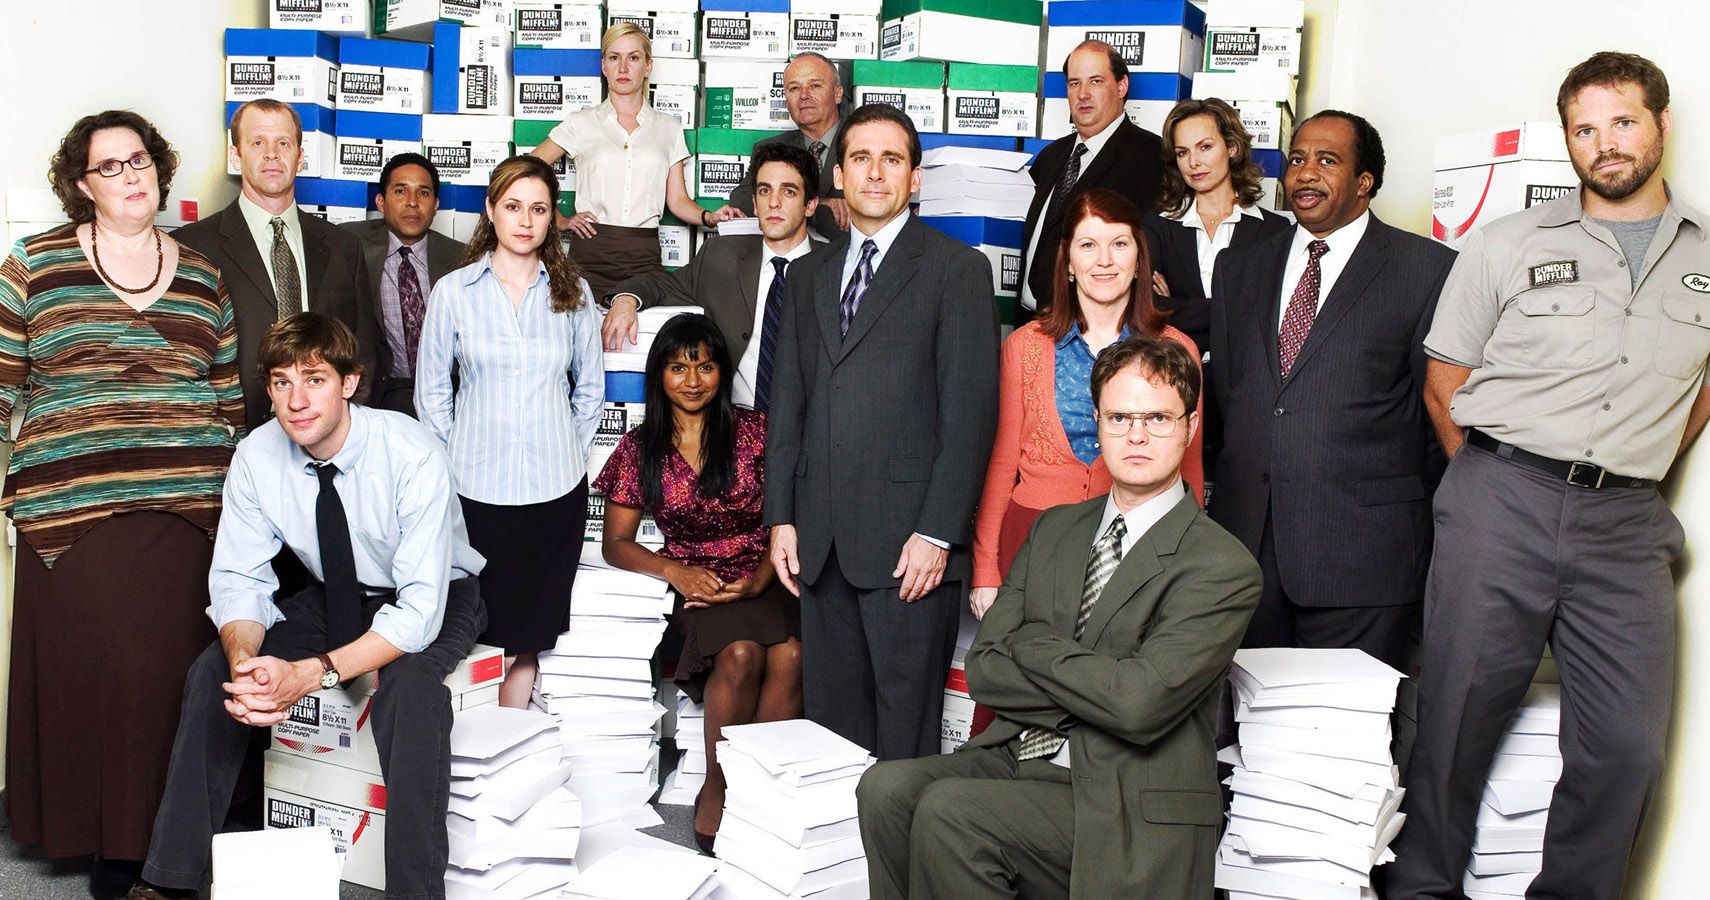 The Office's' Dunder Mifflin is actually making real paper now